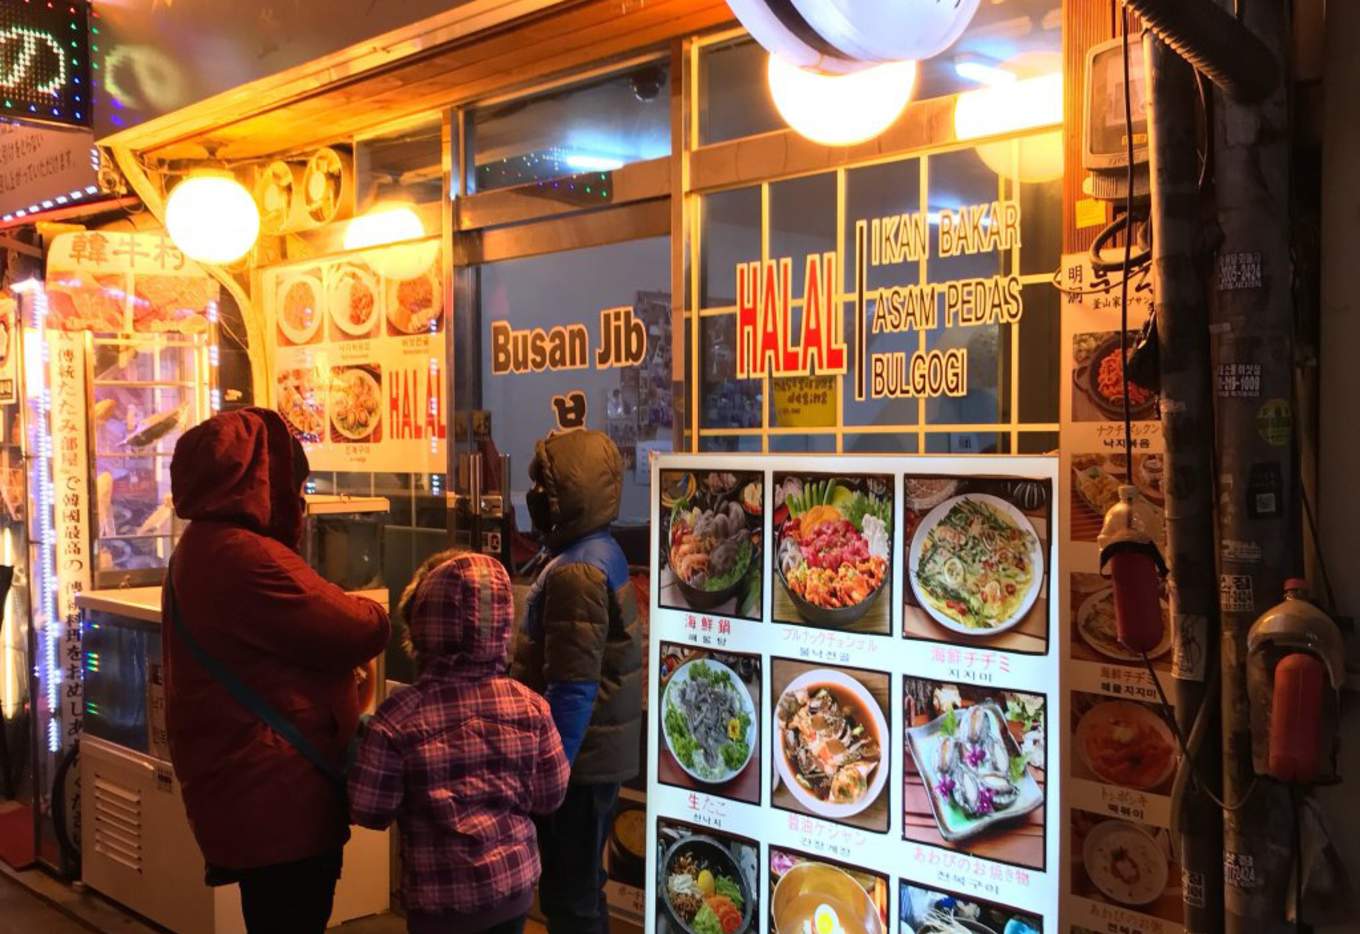 Can’t Find Halal Korean Food In Seoul? Here Are 10 Popular Muslim